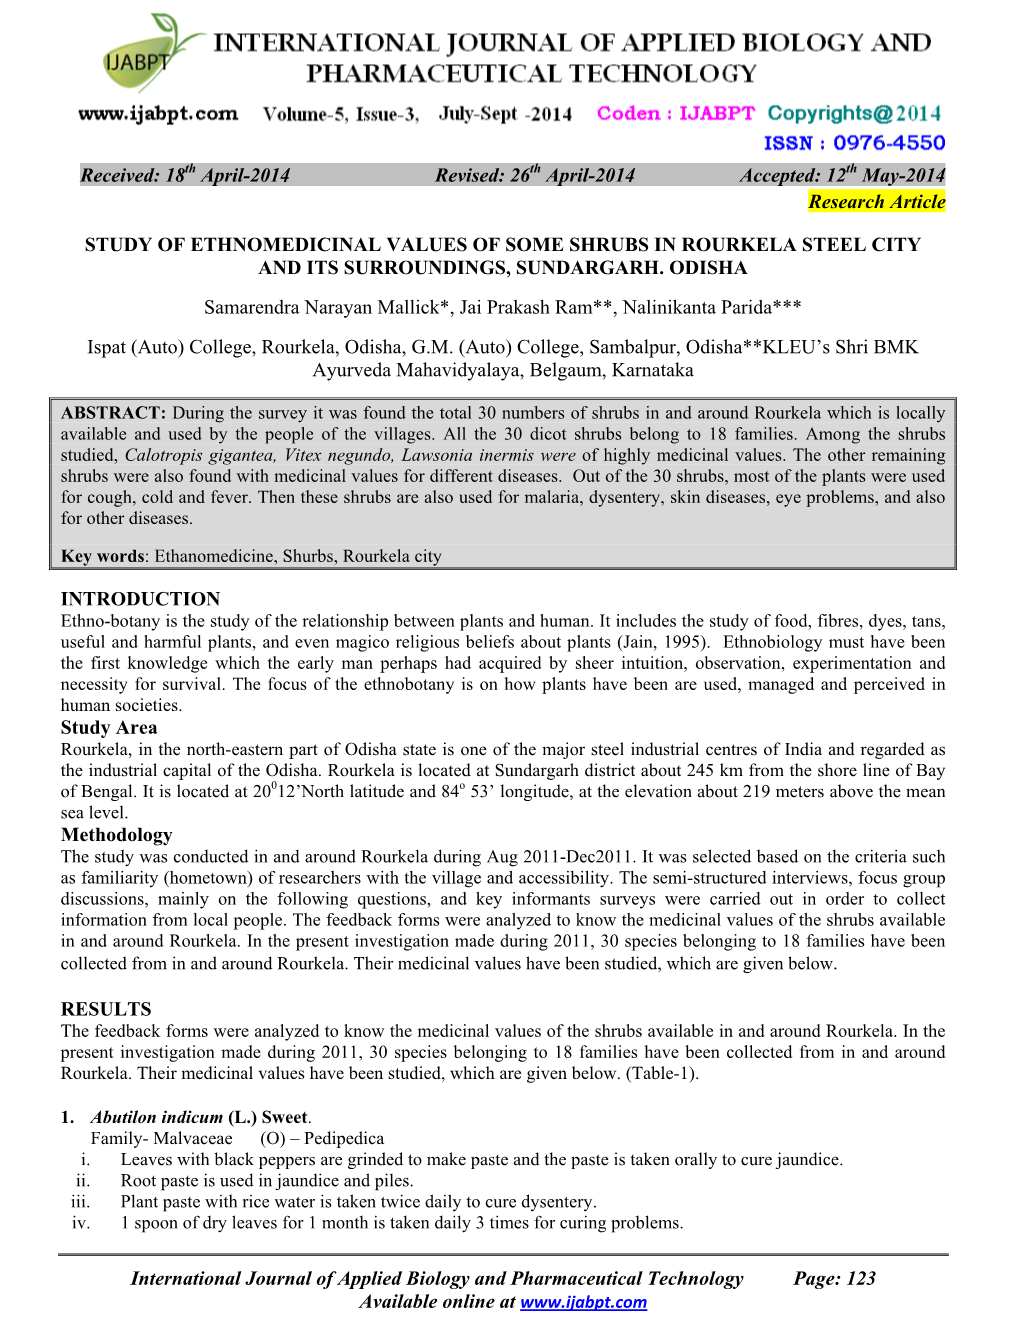 12 May-2014 Research Article STUDY of ETHNOMEDICINAL VALUES OF